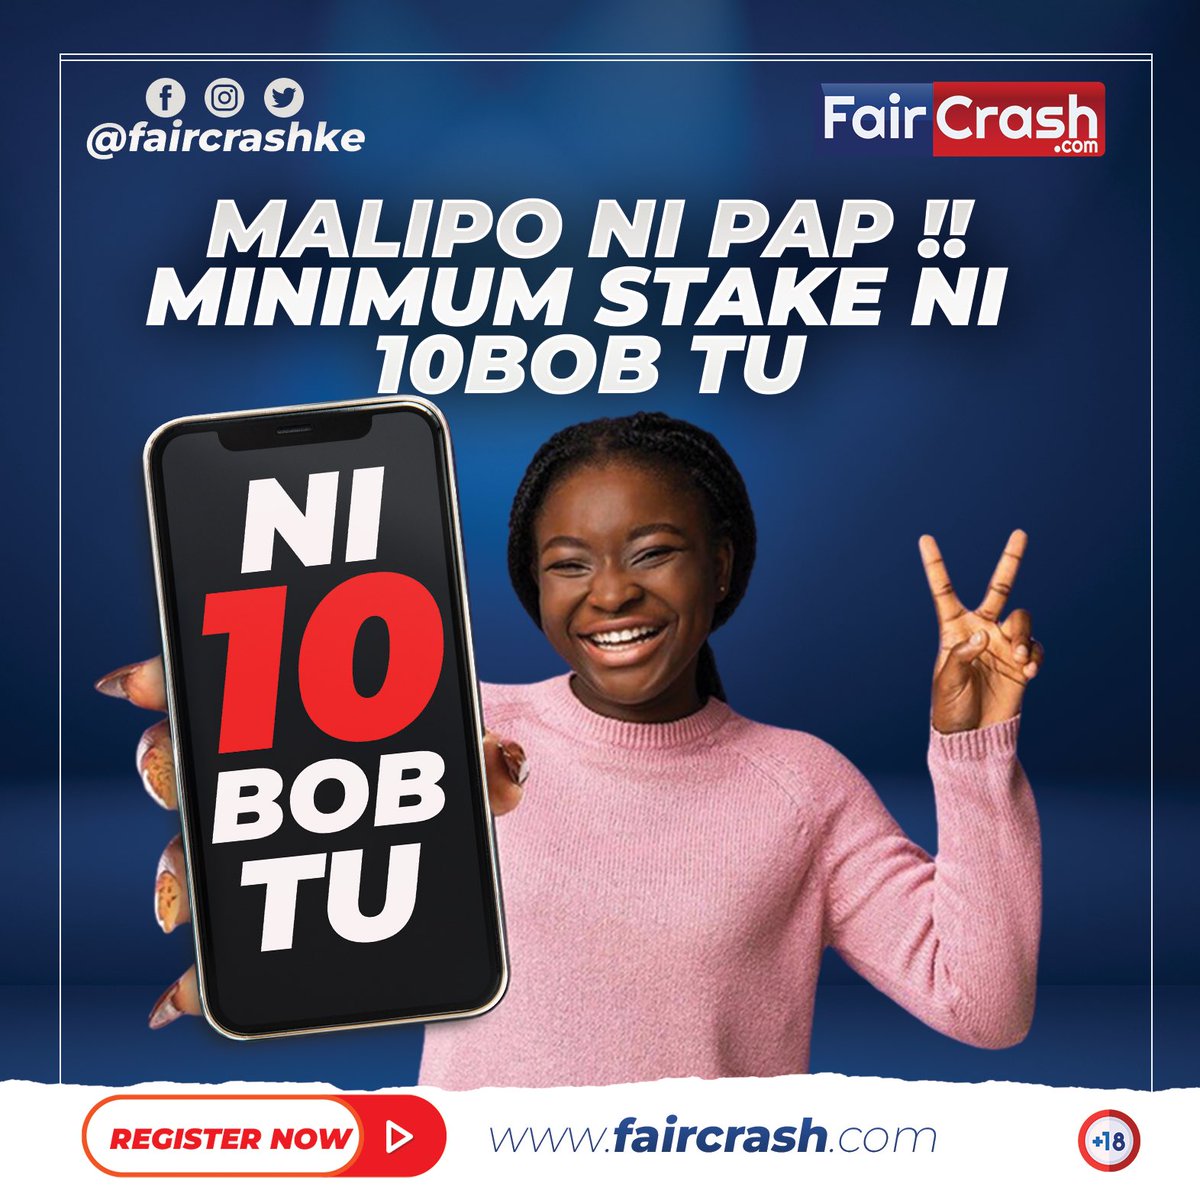 Malipo ni Pap !!! Win up to KES 100,000 every time you play and get paid instantly with just a 10 shillings stake💵💵 Register today! faircrash.com
#faircrash #winbig #CrashGame #MultiplierMania 
#onlinegaming #fun 💯💯